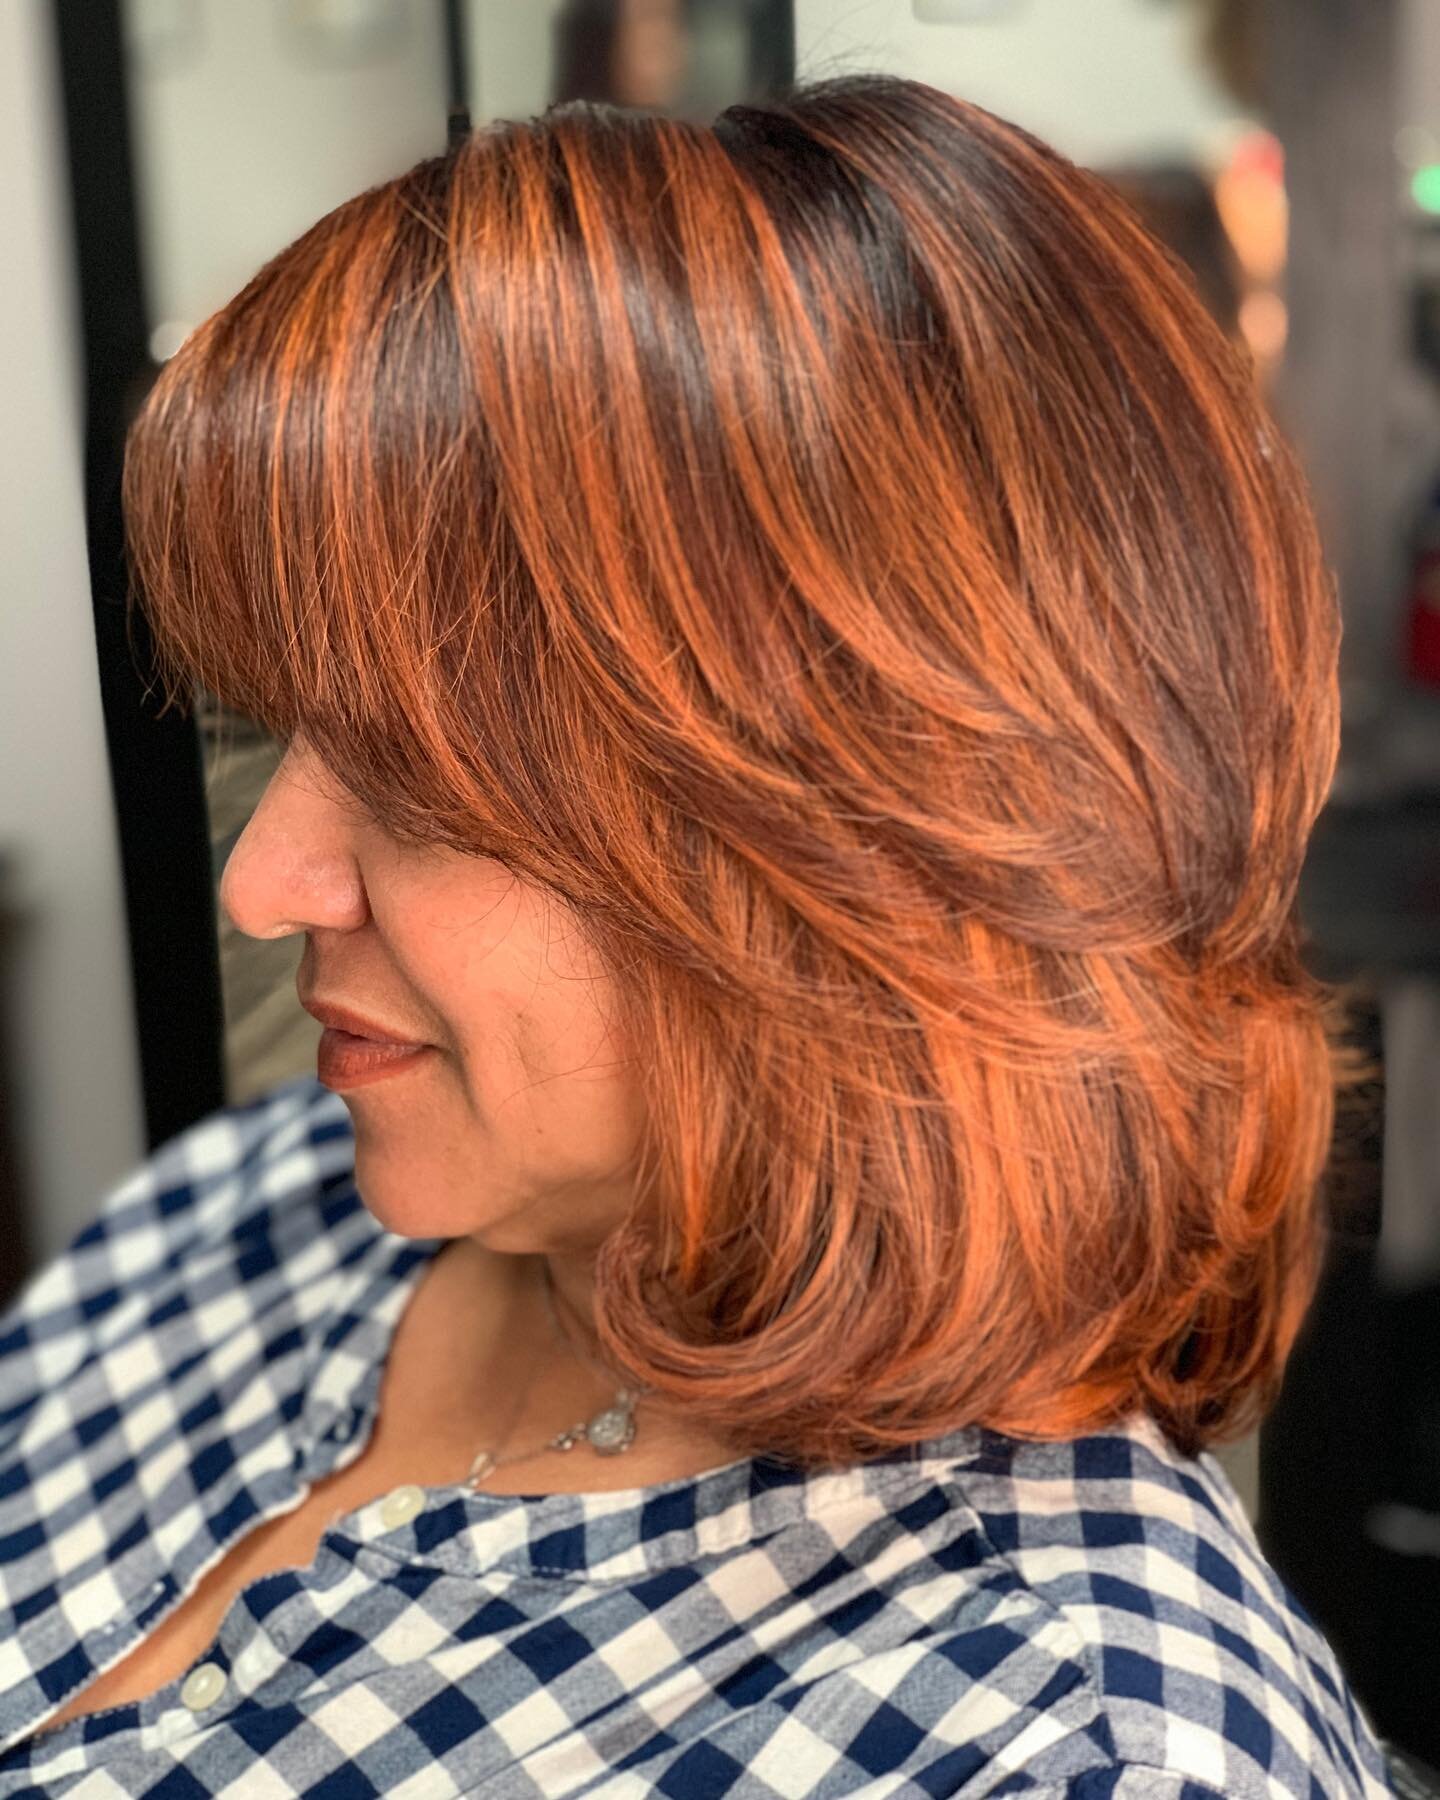 Fall is proof that change is beautiful 🍁 

#fallhair #joico #joicolumishine #copperredhair #fallvibes  #behindthechair #smoothblowout #poconostylist #balayage #licensedtocreate